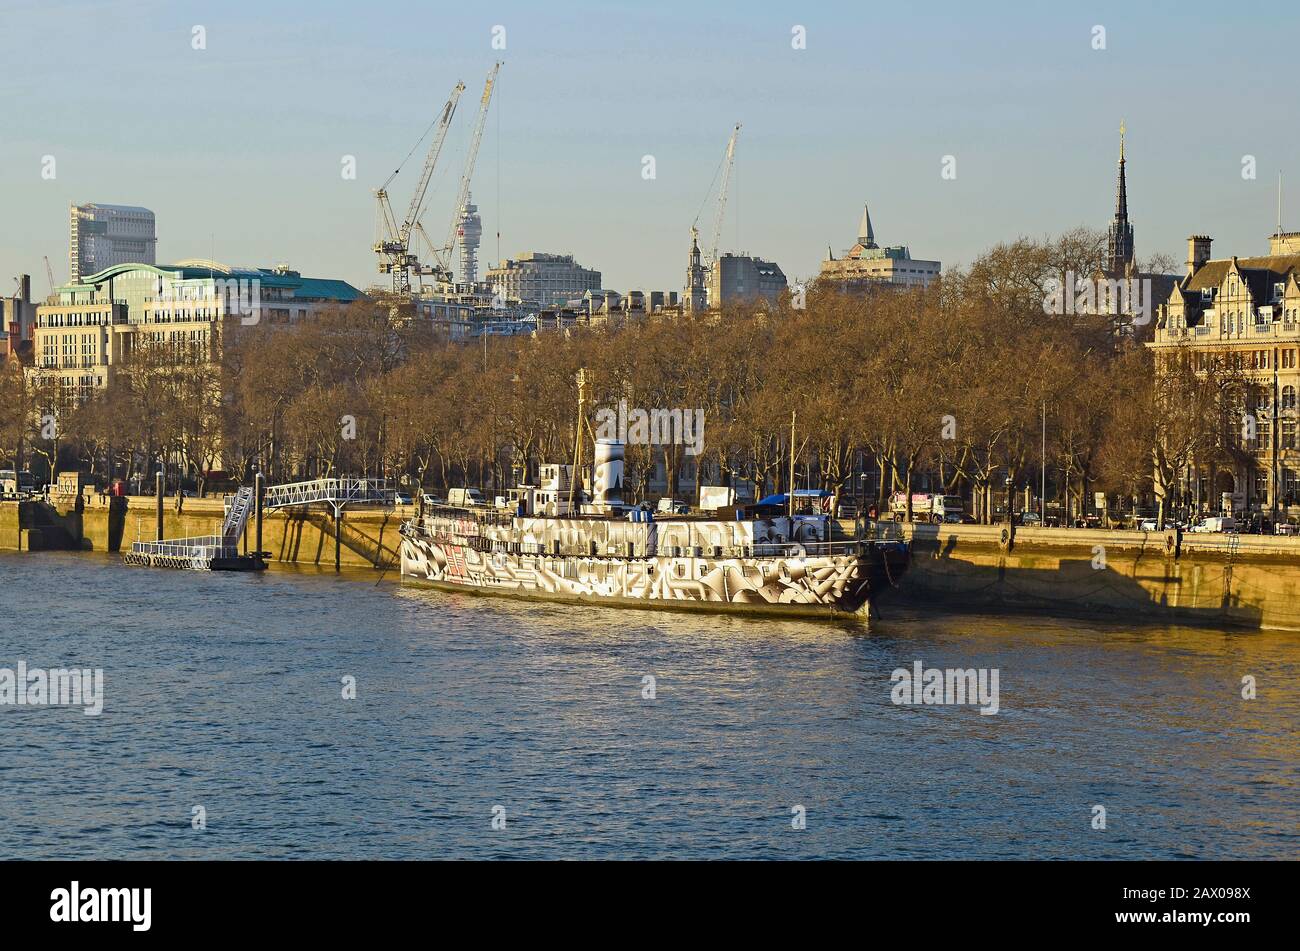 London, Great Britain - January 19th 2016: Artful painted ship HMS President 1918 former HMS Saxifraga on river Thames with different buildings and cr Stock Photo